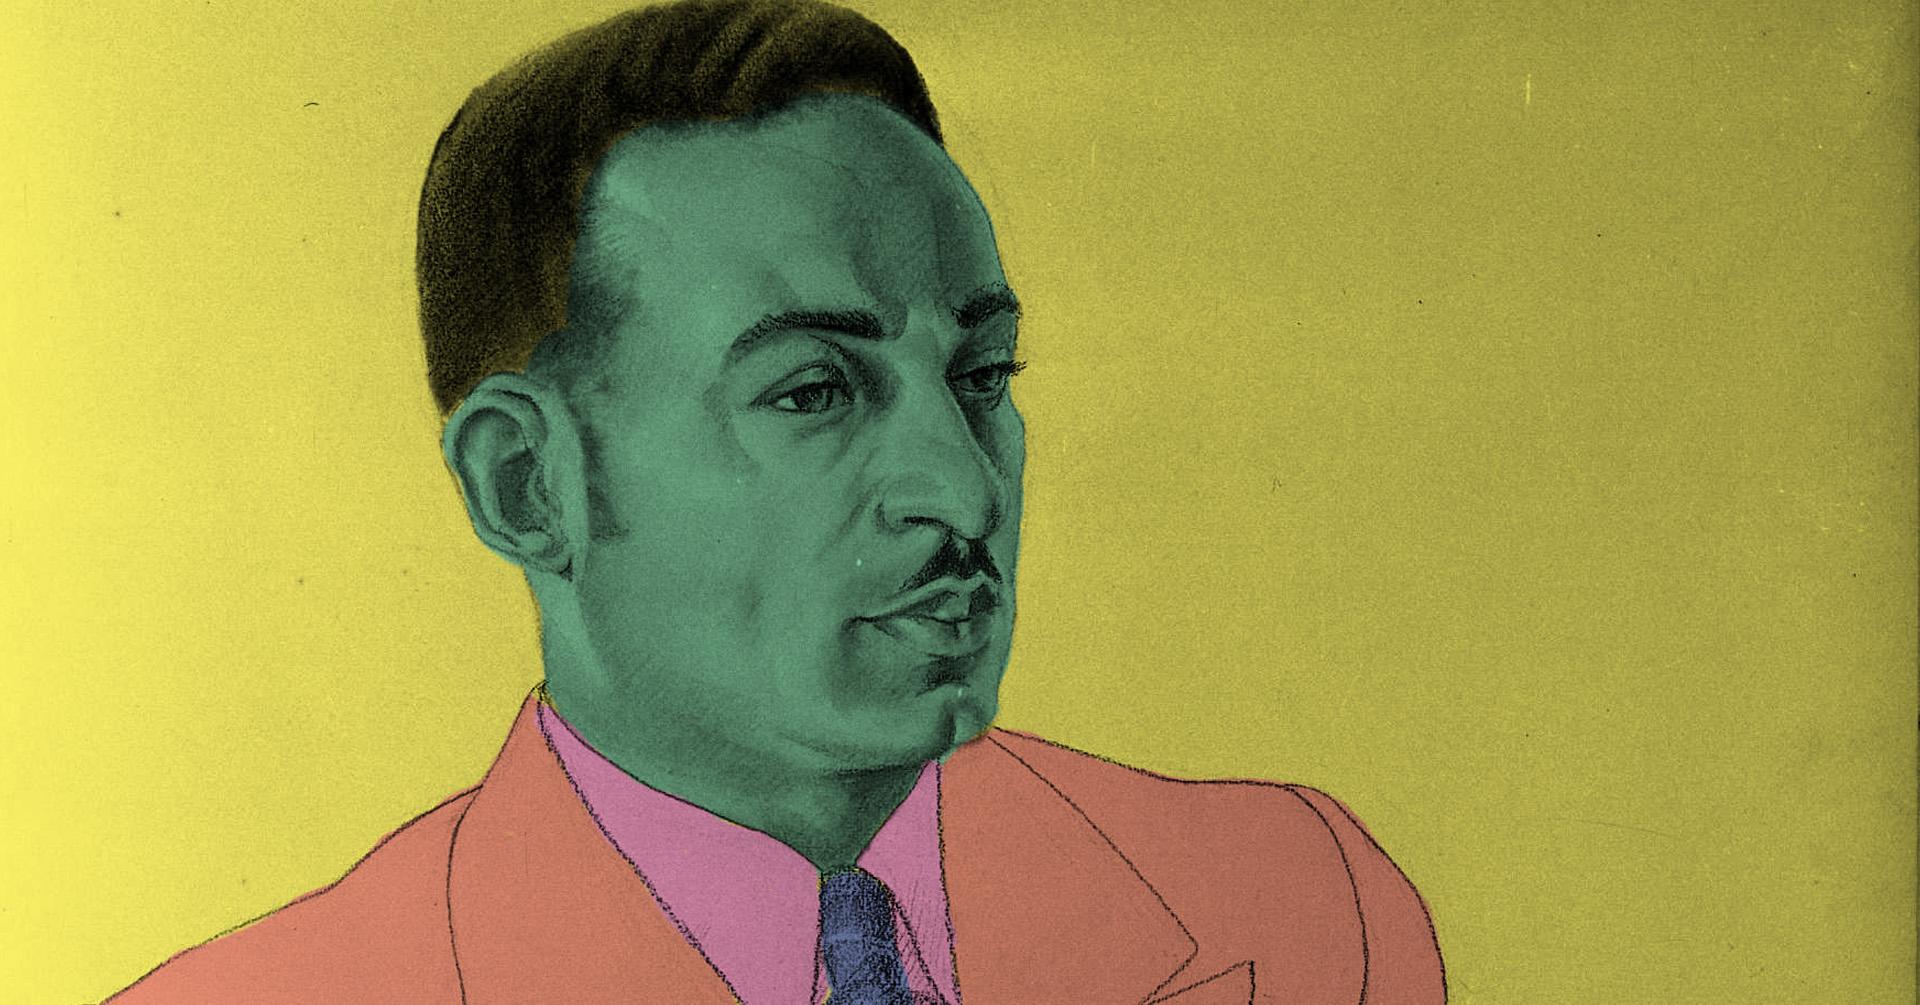 pastel screened image of composer William Dawson in the style of pop art